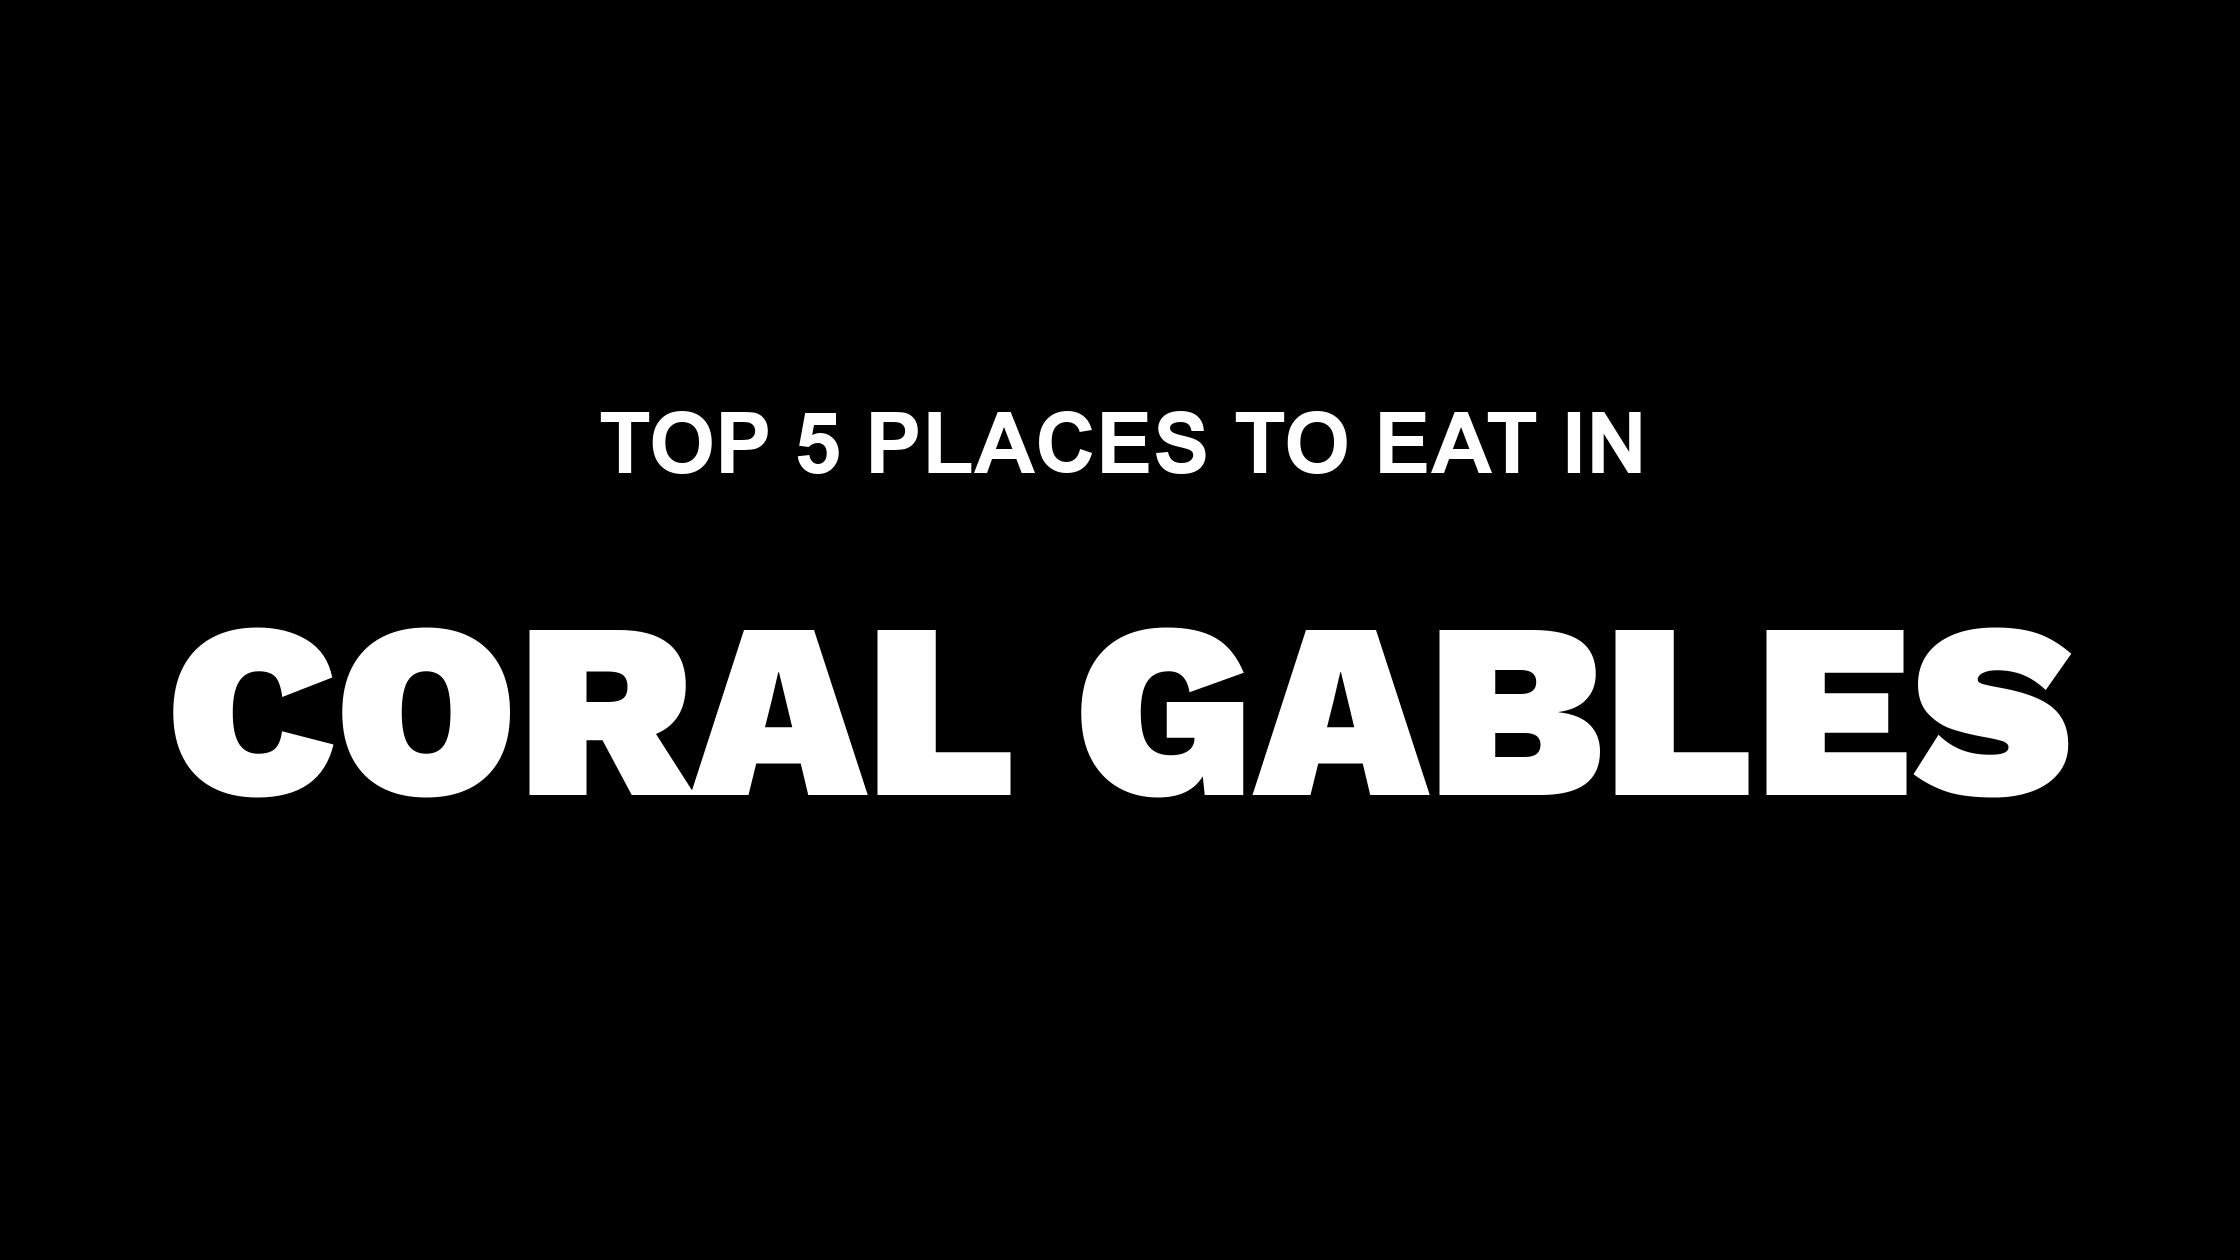 Top 5 Places to Eat in Coral Gables